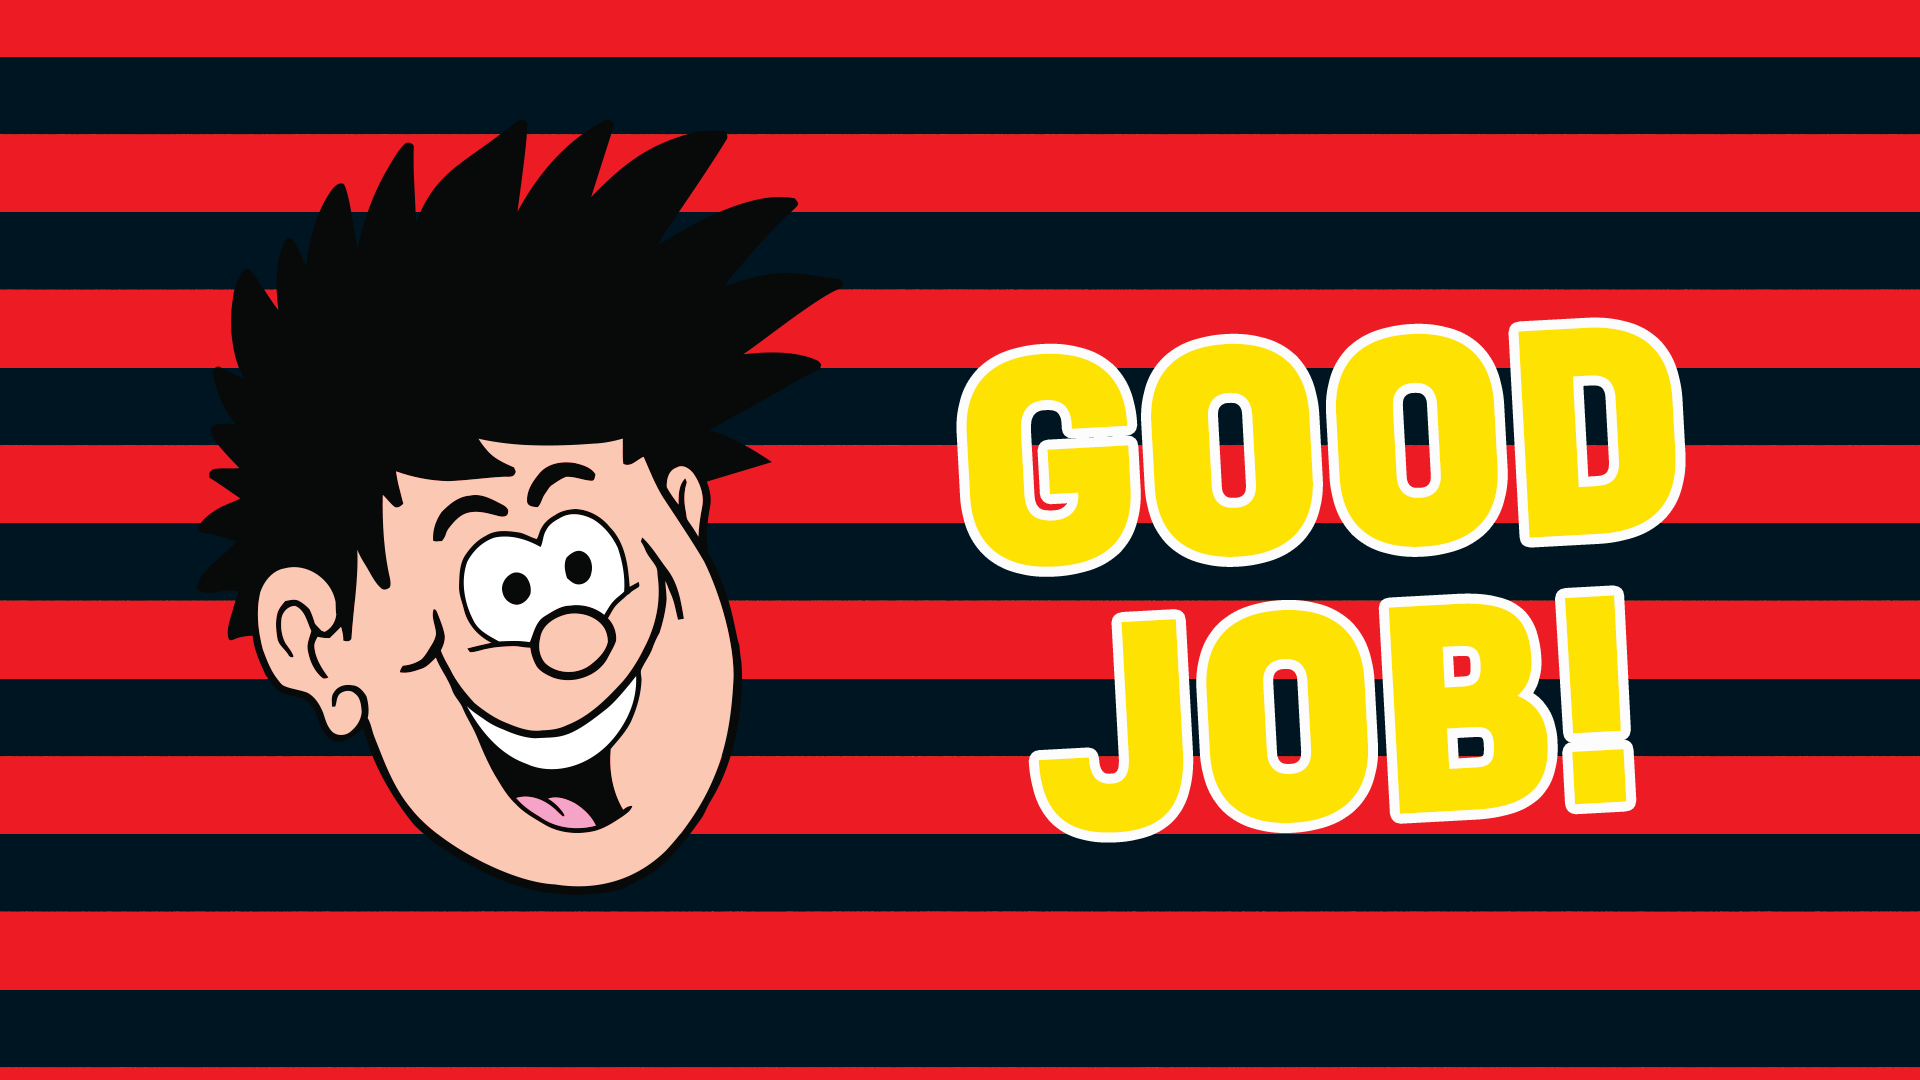 Yay! You know loads about Beano history! But can you get 100% next time? We believe in you!